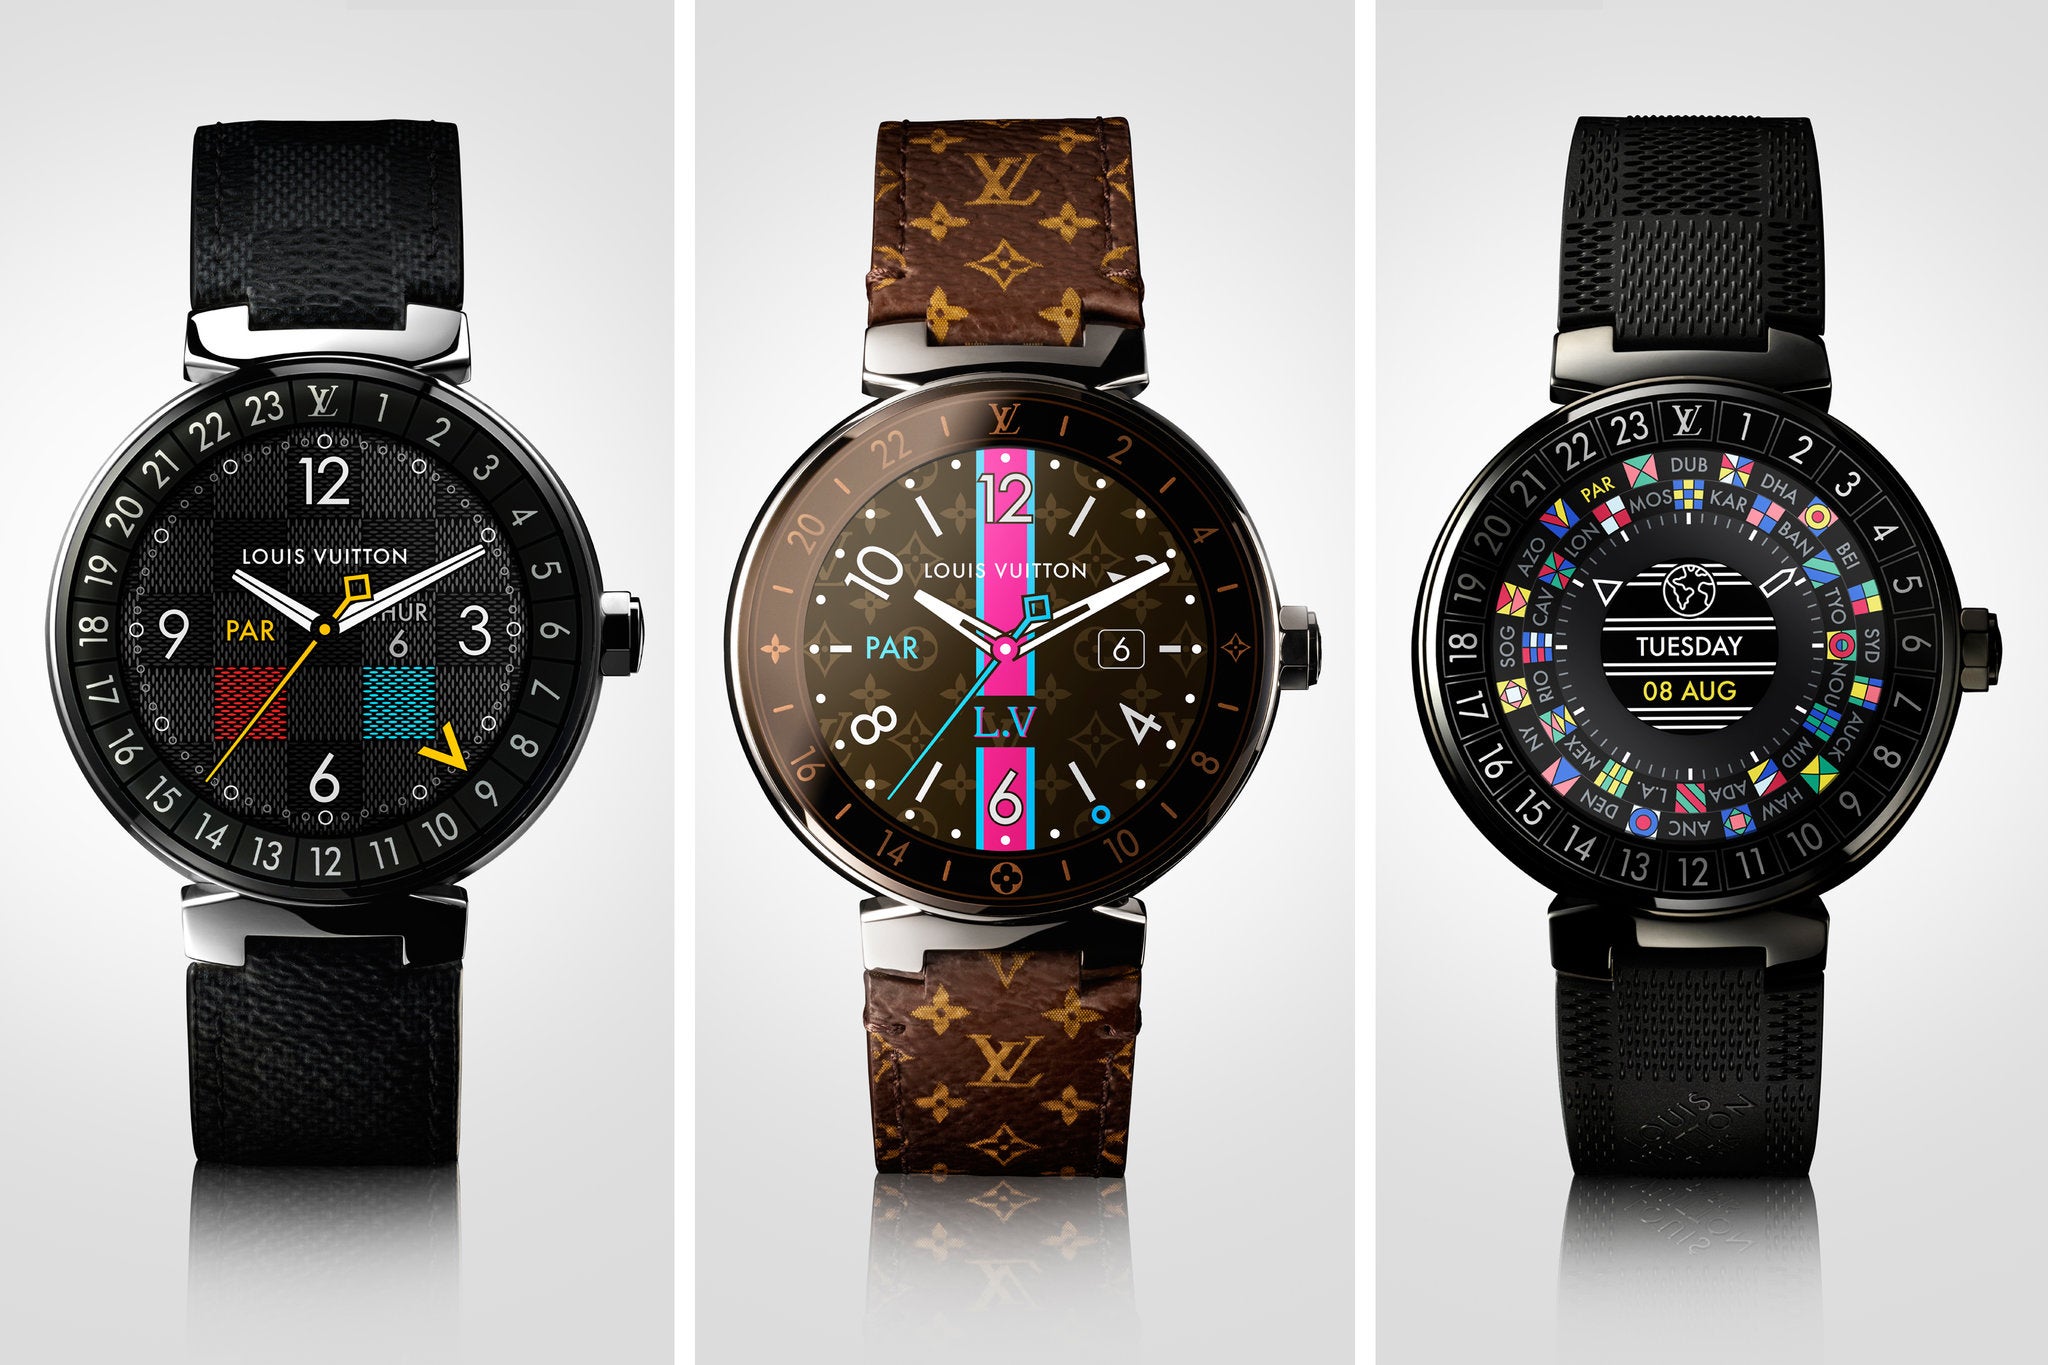 Louis Vuitton Tambour Horizon (Graphite, Monogram, and Black) - Louis Vuitton wants to sell you an Android Wear 2.0 watch for $3,000